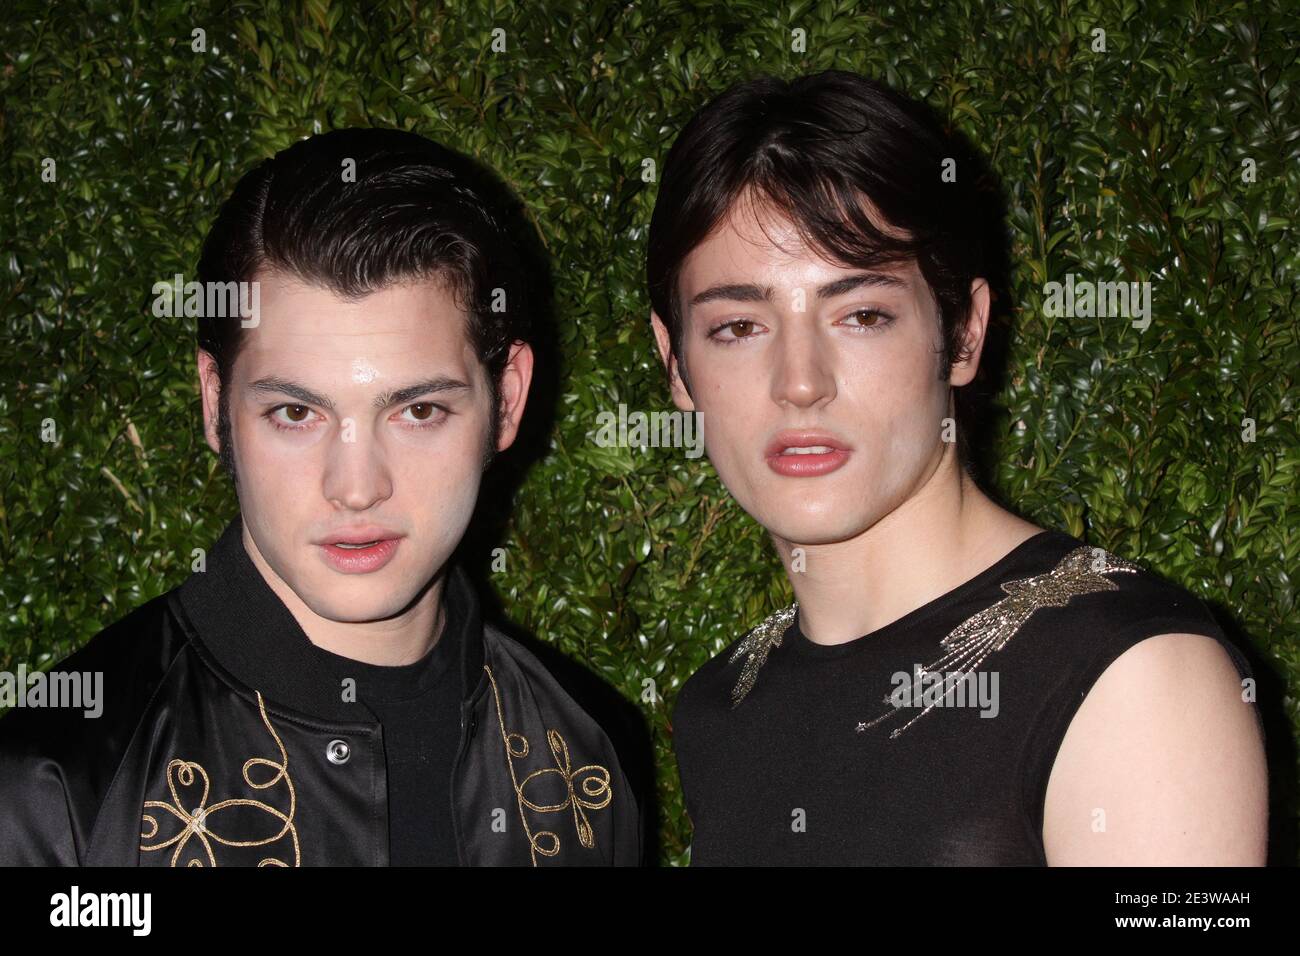 Peter Brant, Jr.and Harry Brant, sons of Stephanie Seymour and Peter M. Brant attend the tenth annual CHANEL Tribeca Film Festival Artist Dinner at Balthazar Restaurant in New York City on April 20, 2015.  Photo Credit: Henry McGee/MediaPunch Stock Photo